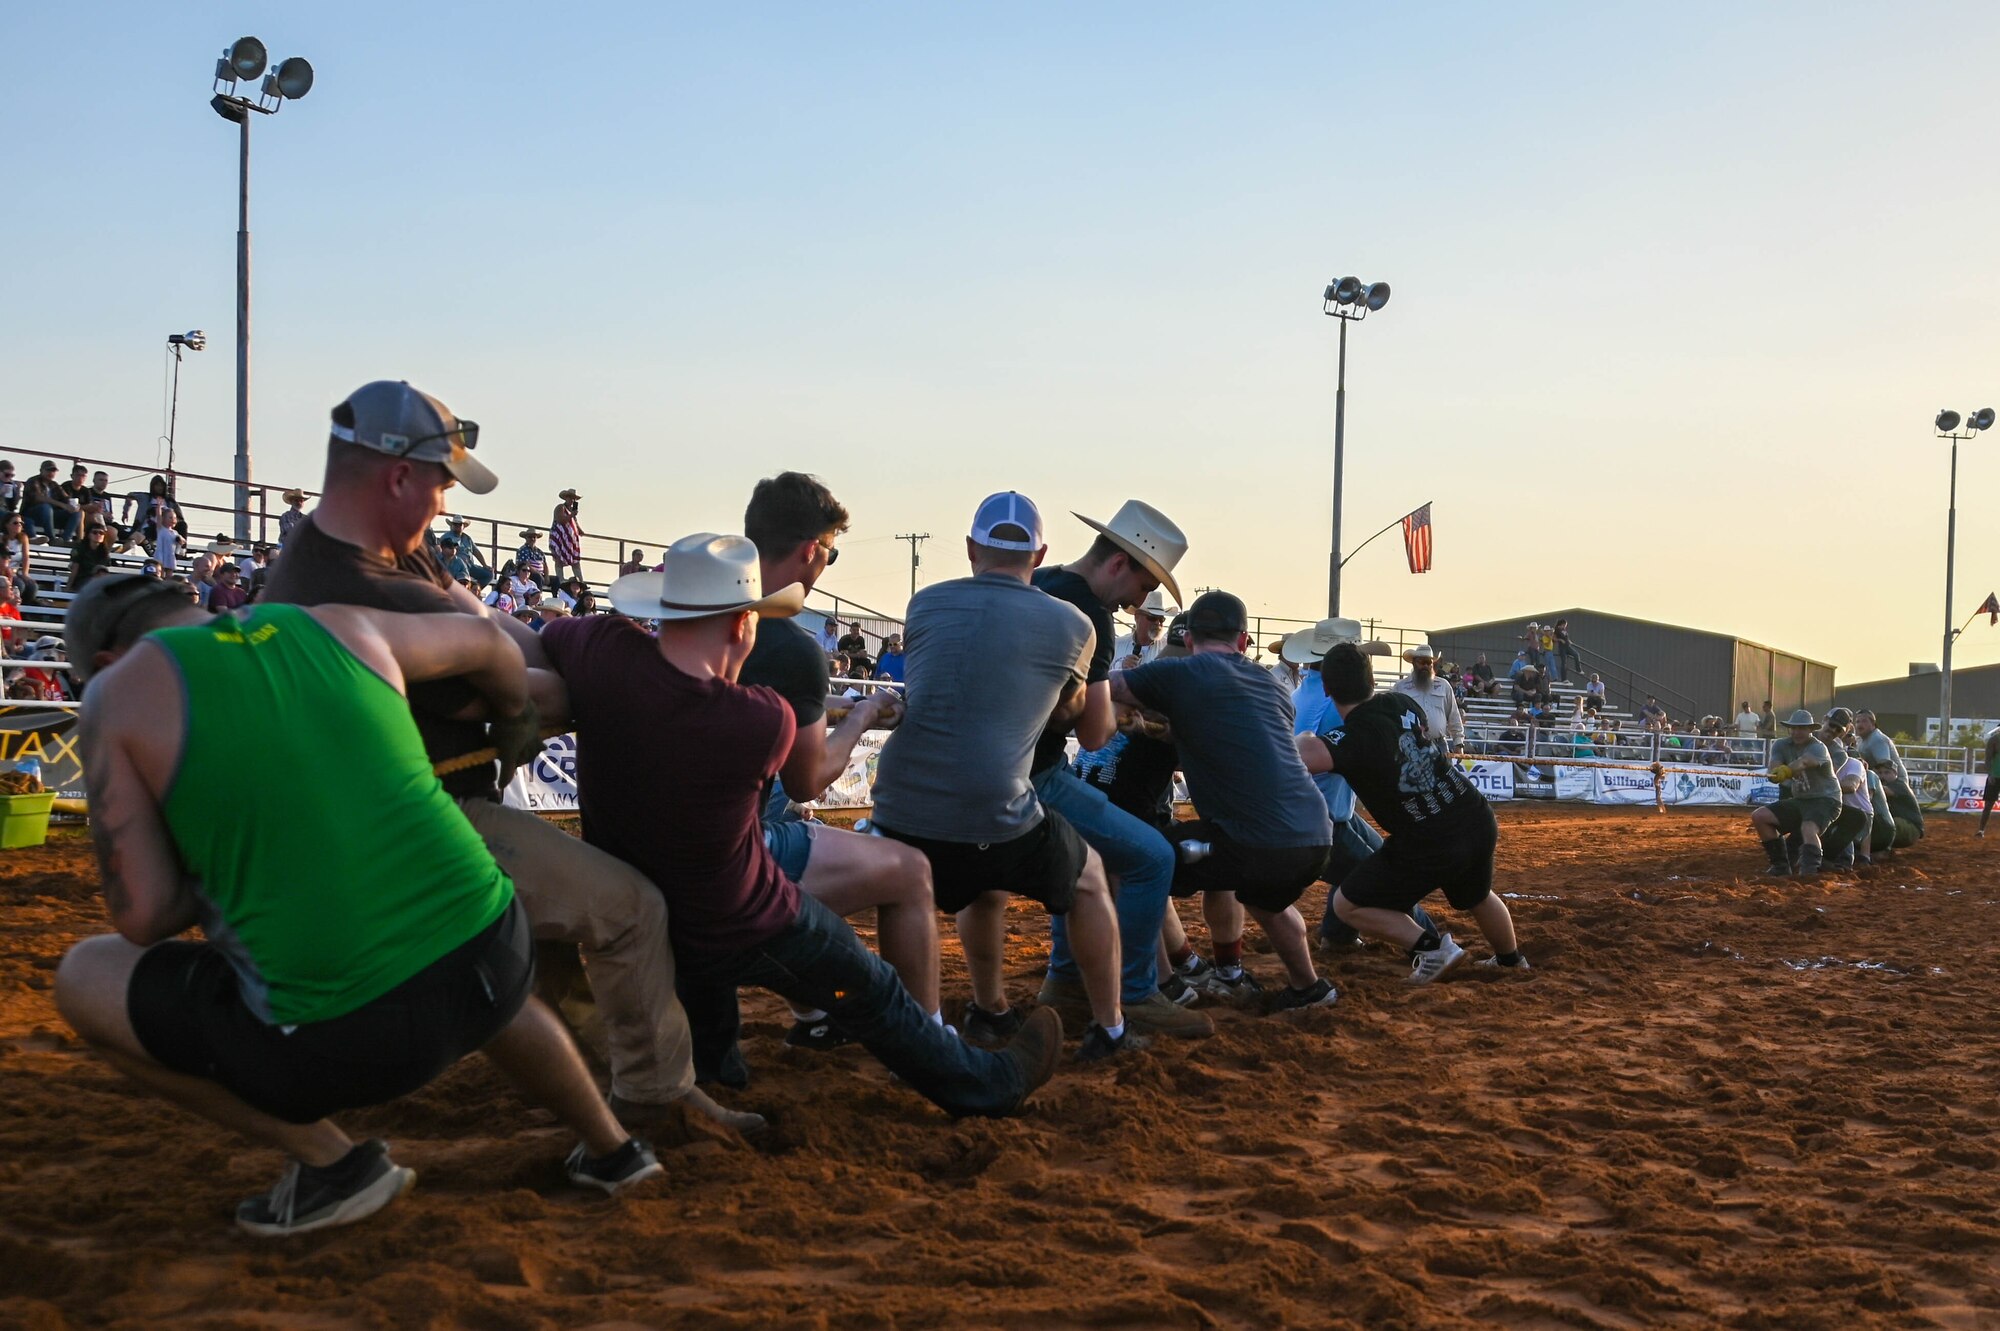 97th Air Mobility Wing Airmen participate in a tug of war competition at a Military Appreciation Night event in Altus, Oklahoma Aug. 24, 2023. Seven teams of Airmen from Altus Air Force Base took part in the event. (U.S. Air Force photo by Airman 1st Class Heidi Bucins)